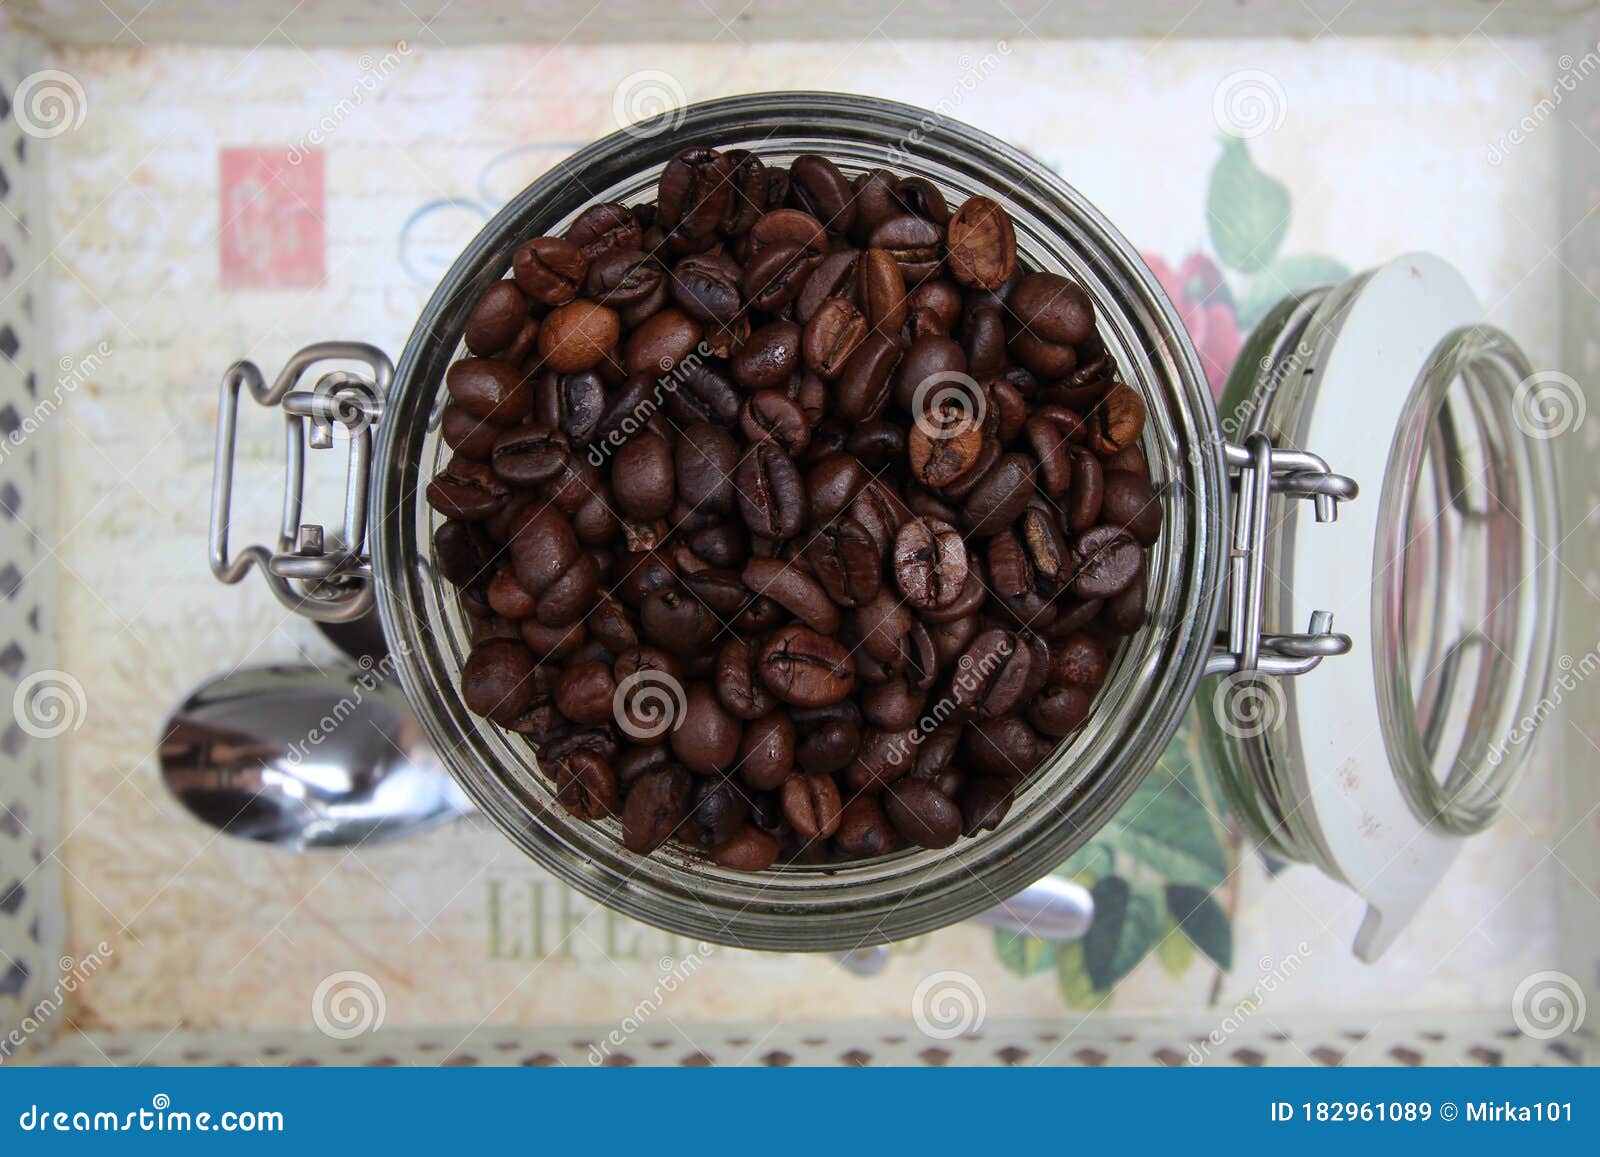 background with many small coffee beans in the jar